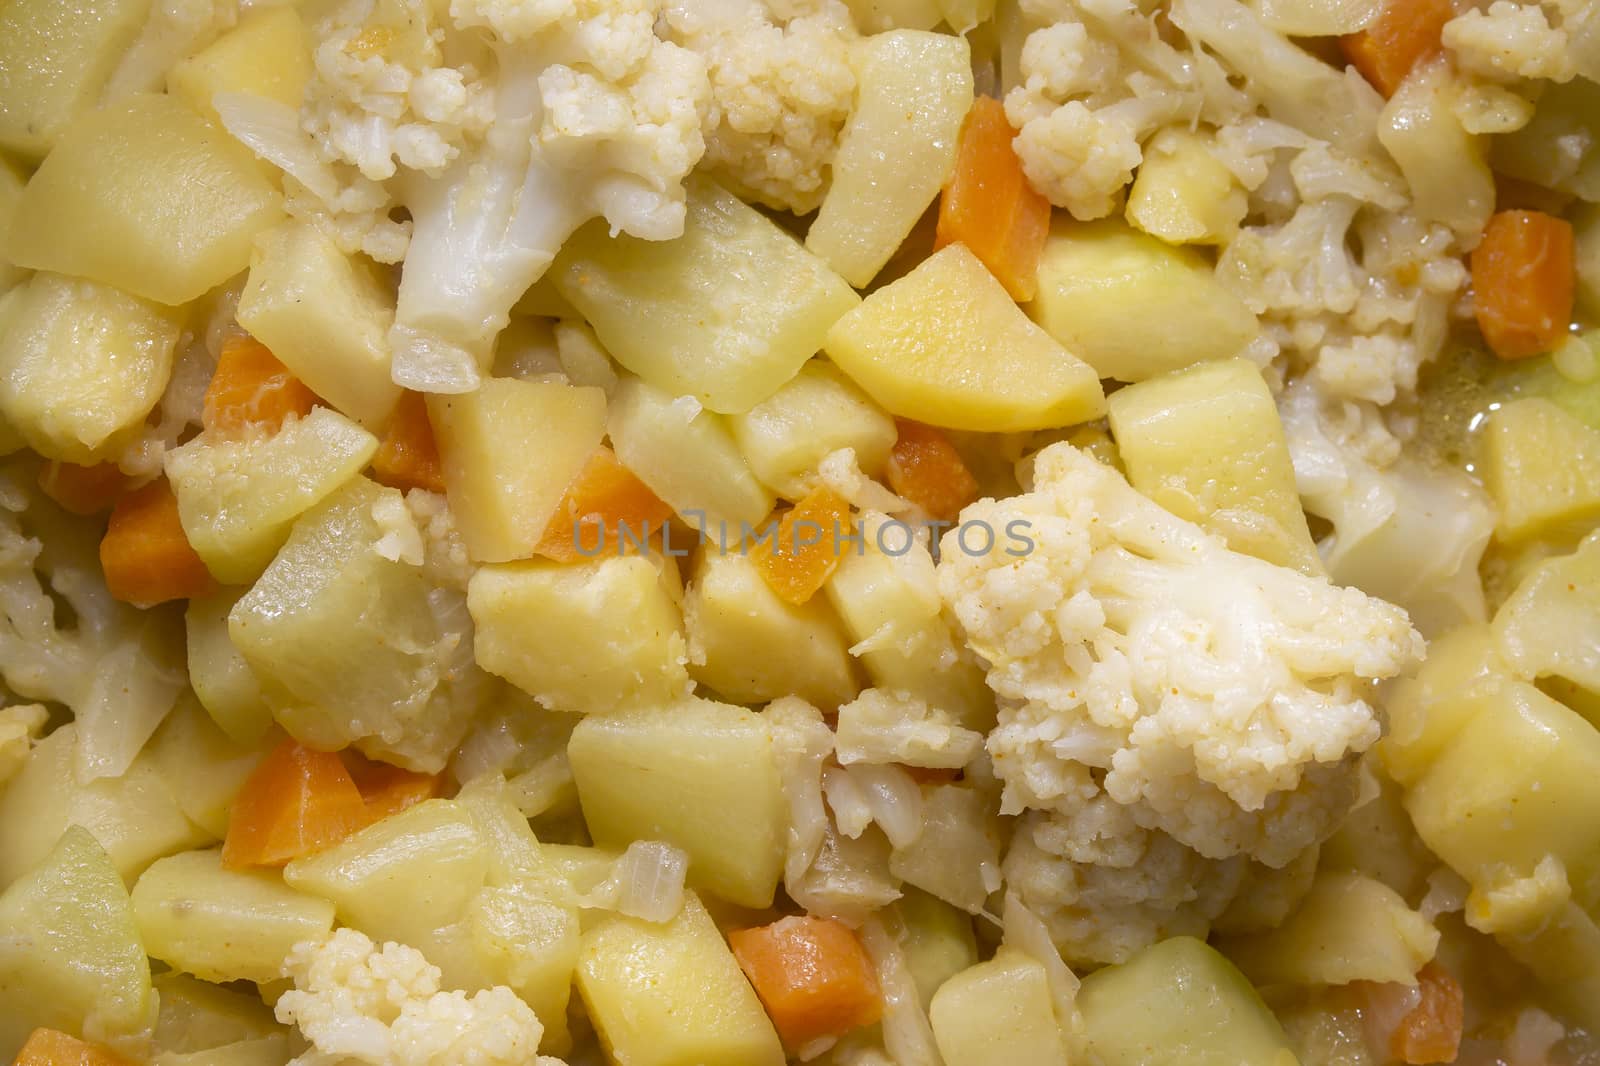 cauliflower, carrots, potatoes zucchini steamed vegetables Healthy eating